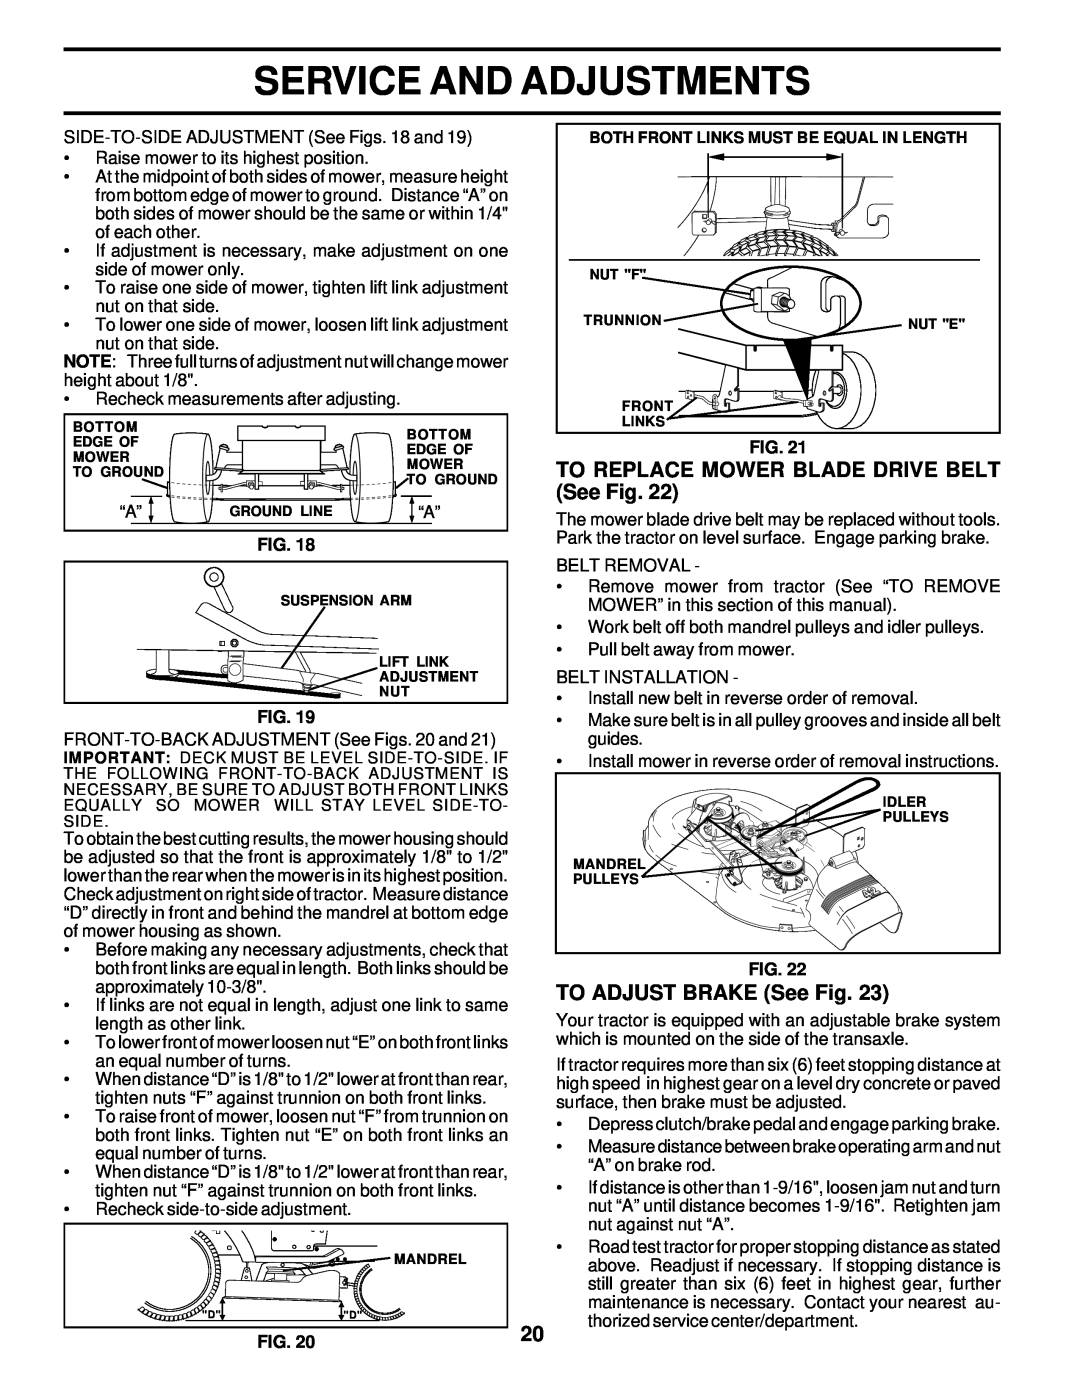 Poulan 178227 owner manual TO REPLACE MOWER BLADE DRIVE BELT See Fig, TO ADJUST BRAKE See Fig, Service And Adjustments 